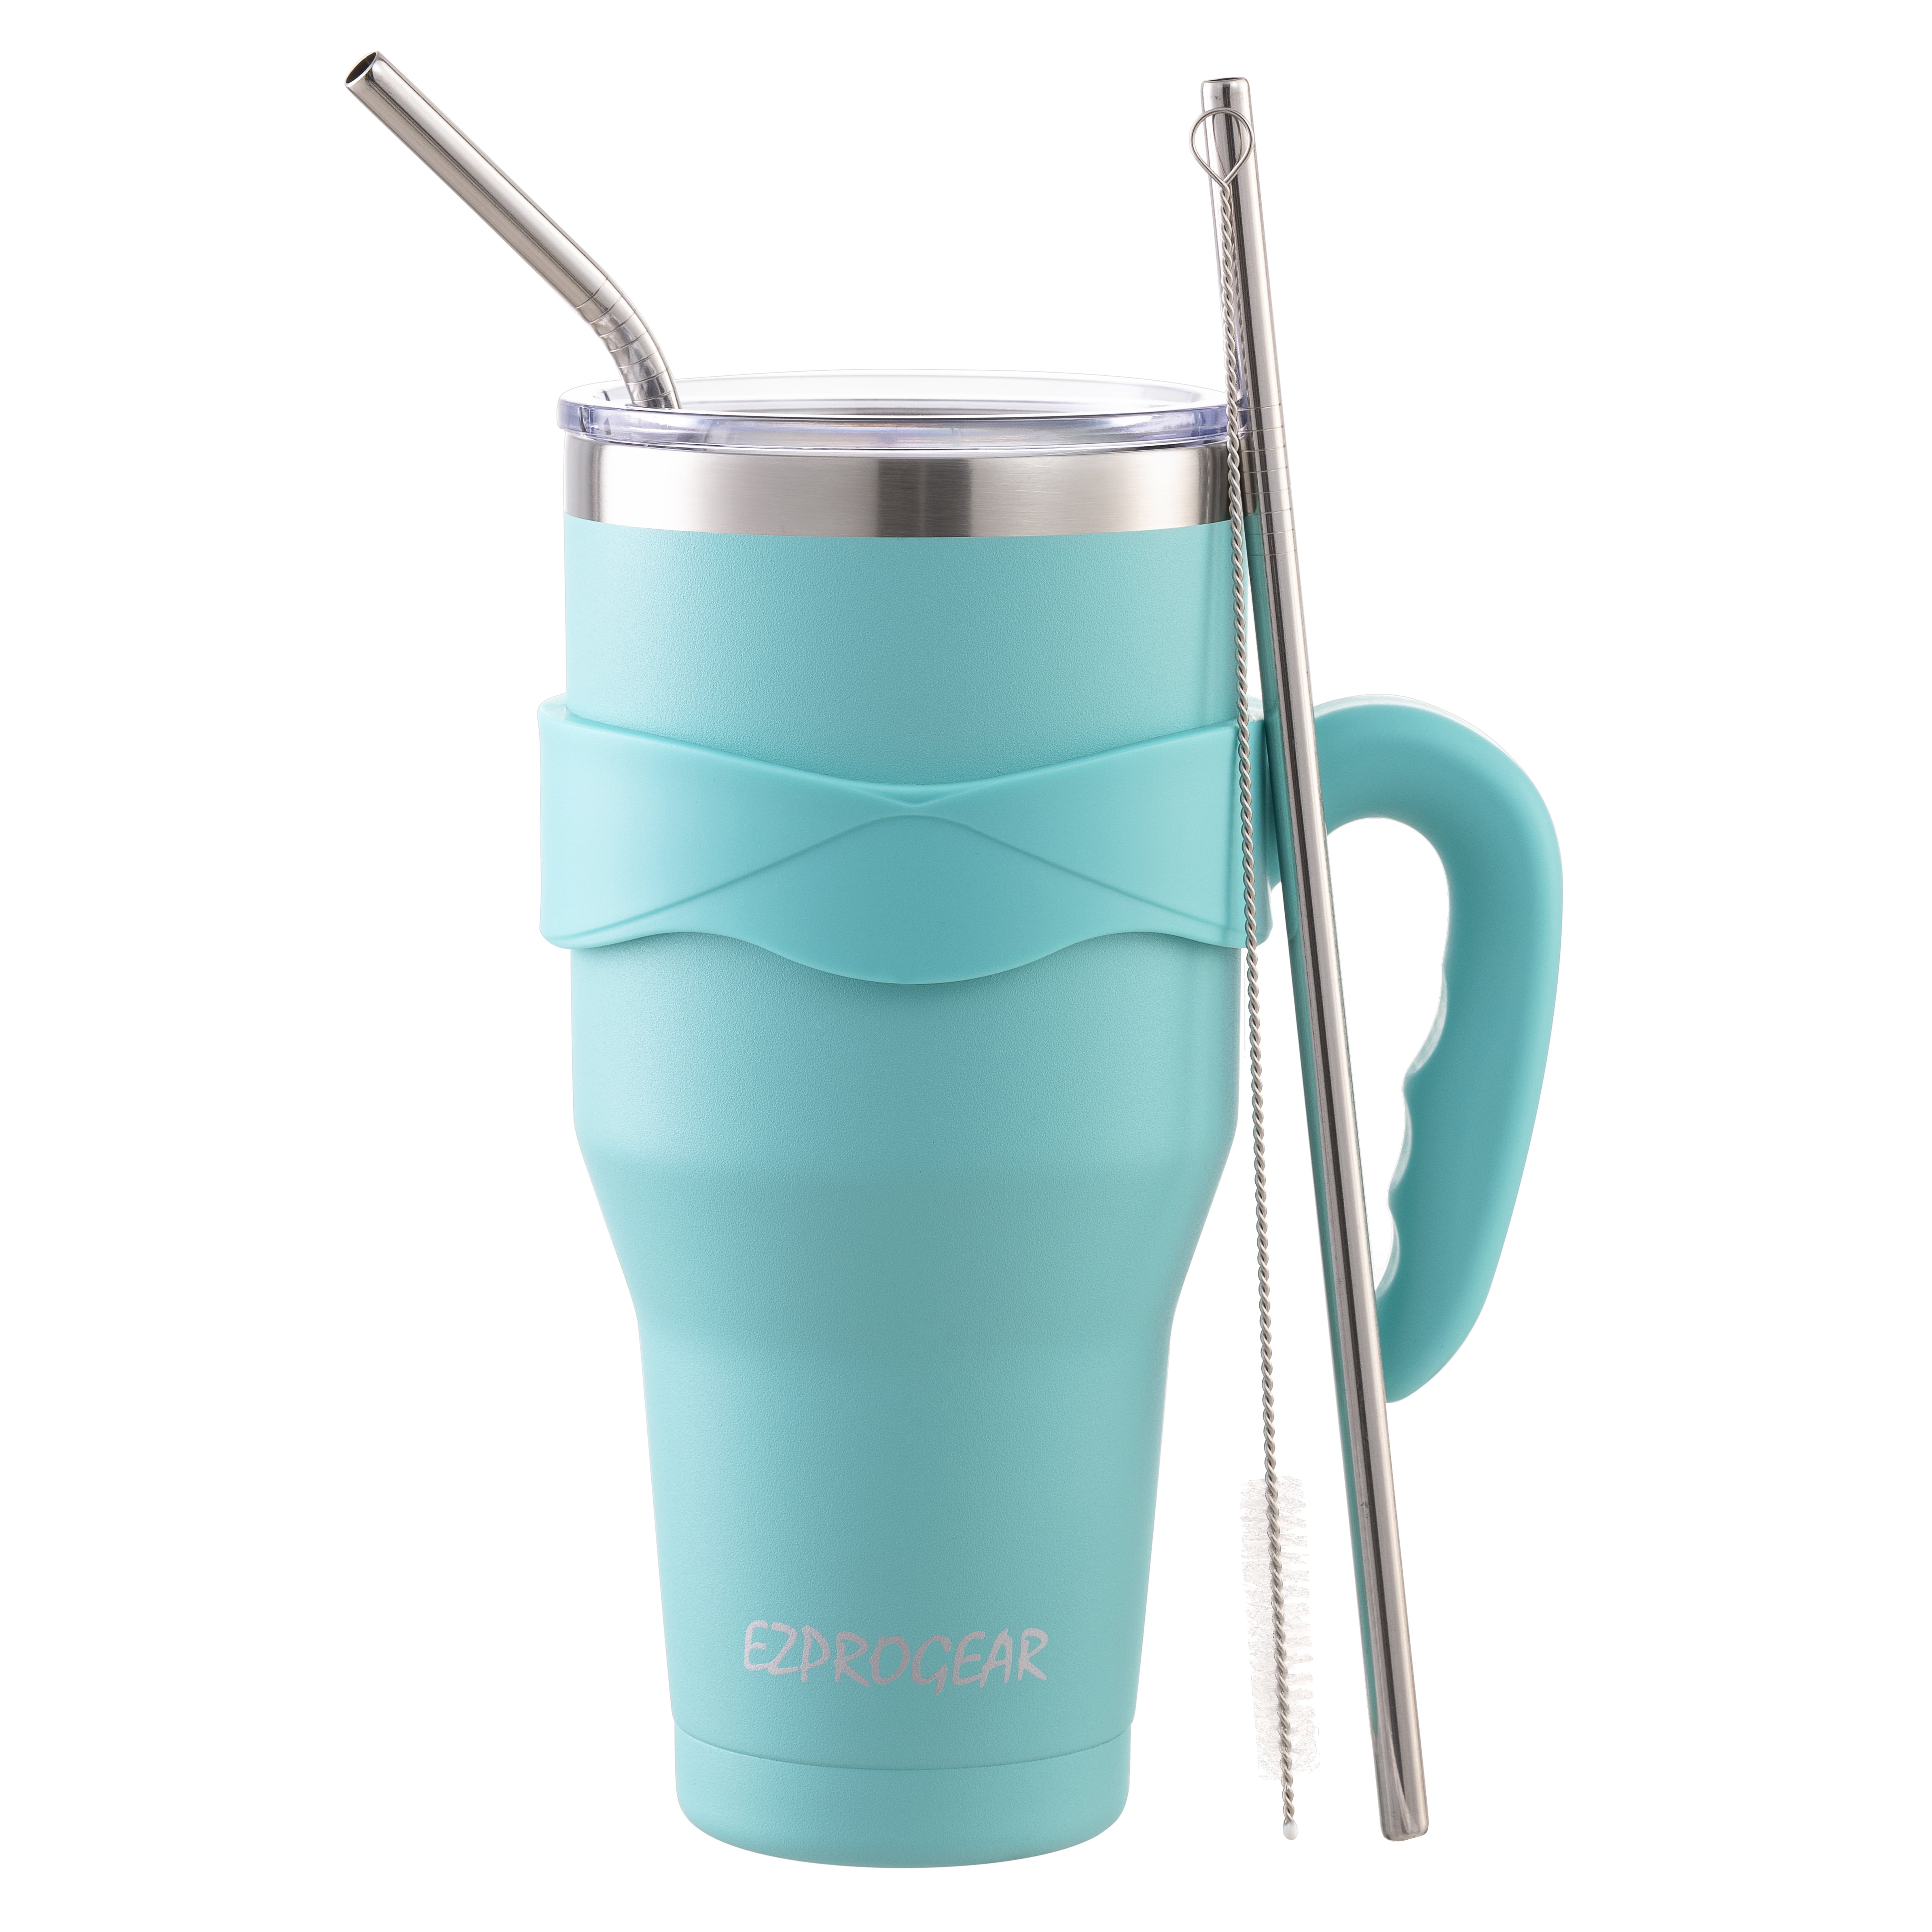 40oz Stainless Steel Tumbler with Handle and Straw Lid,100% Leak-proof  Travel Coffee Mug, Wall Vacuum Insulated Mug Keeps Drinks Cold & Hot,Dishwasher  Safe Cup for Water Iced Tea or Coffee, Price $18.